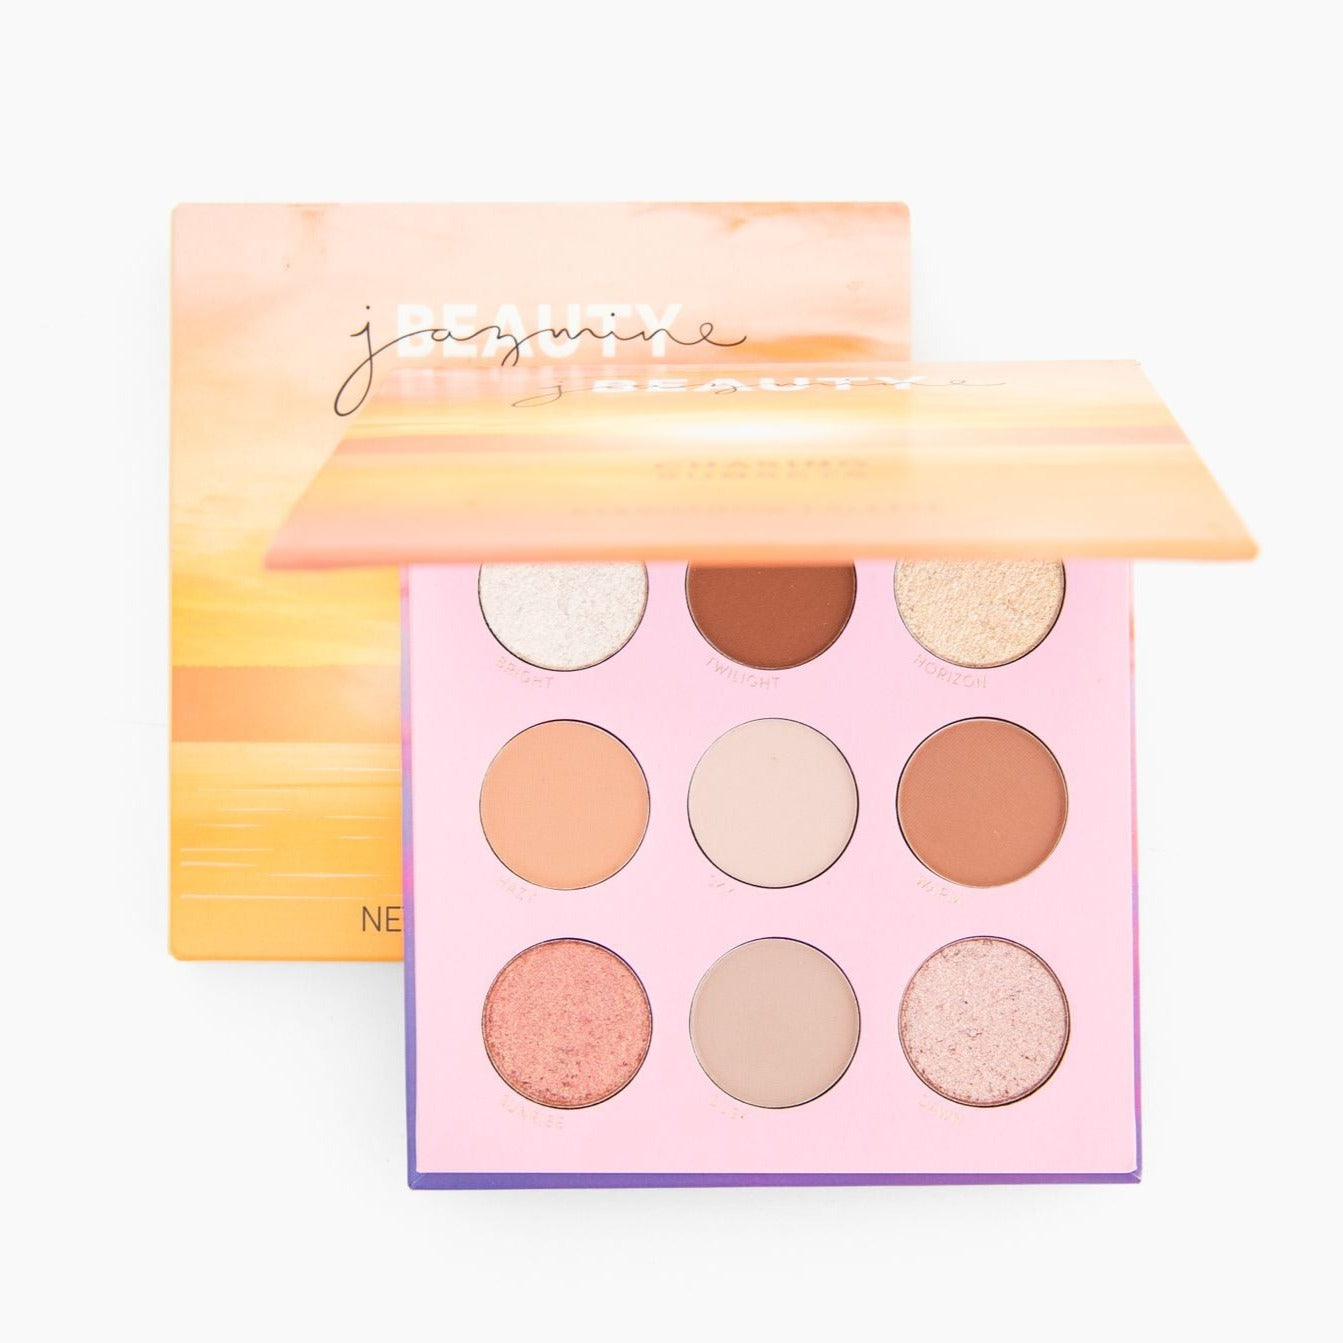 Chasing Sunsets Eyeshadow Palette